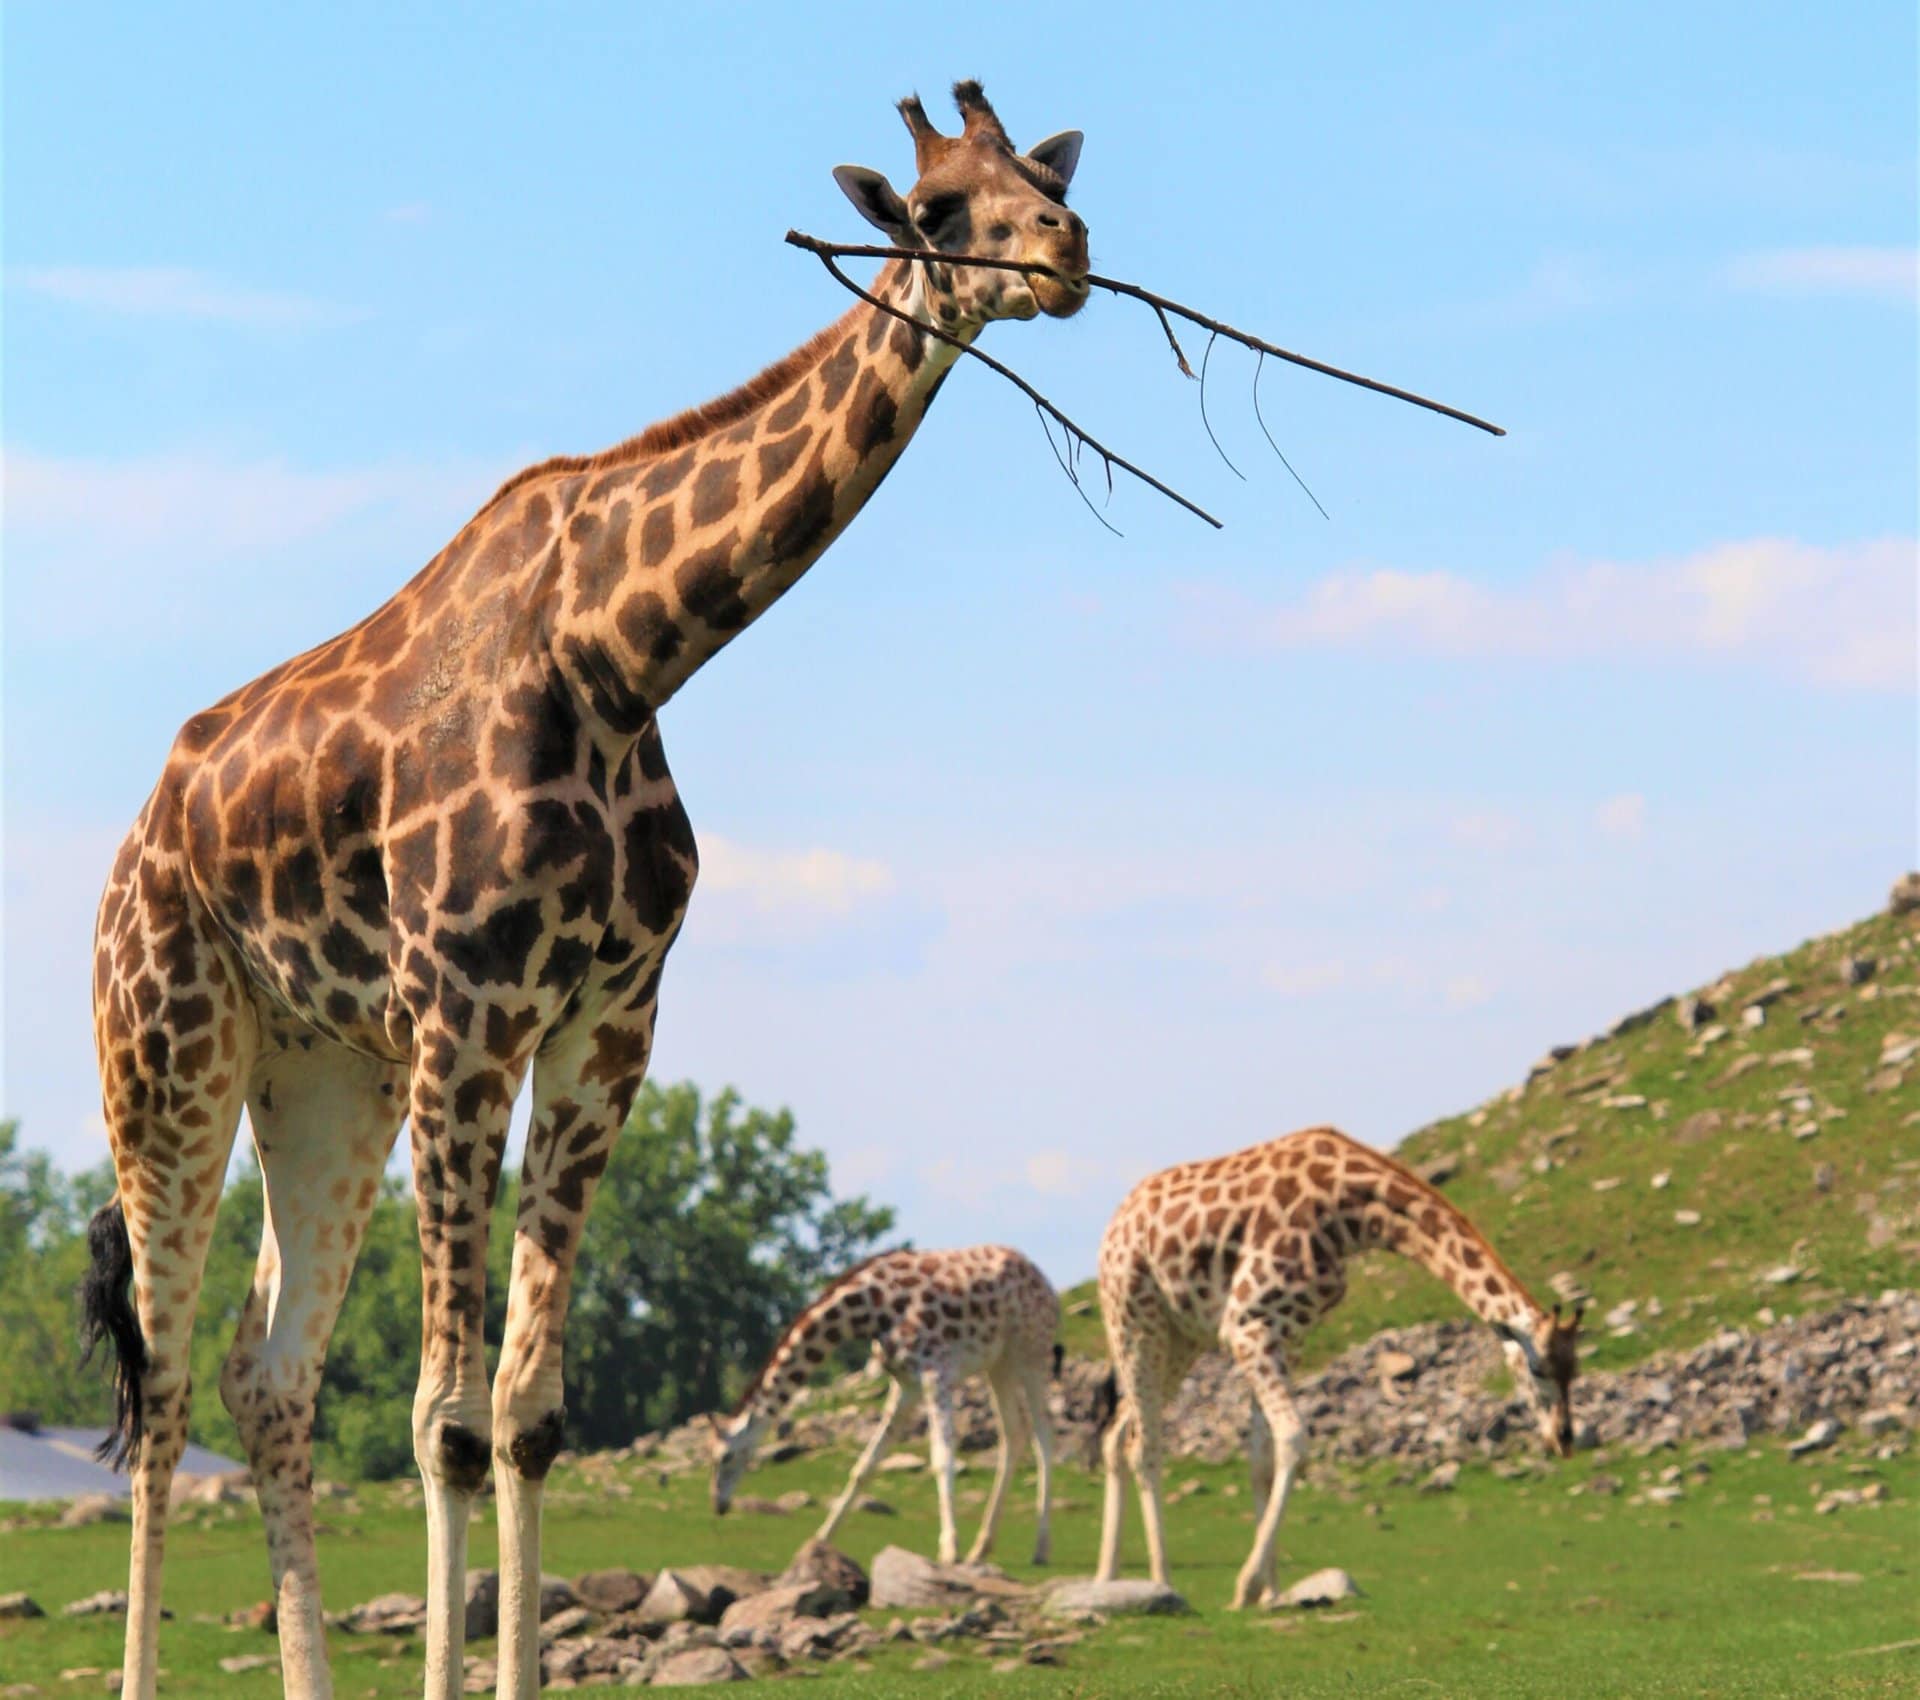 Giraffe with stick and 2 in the background